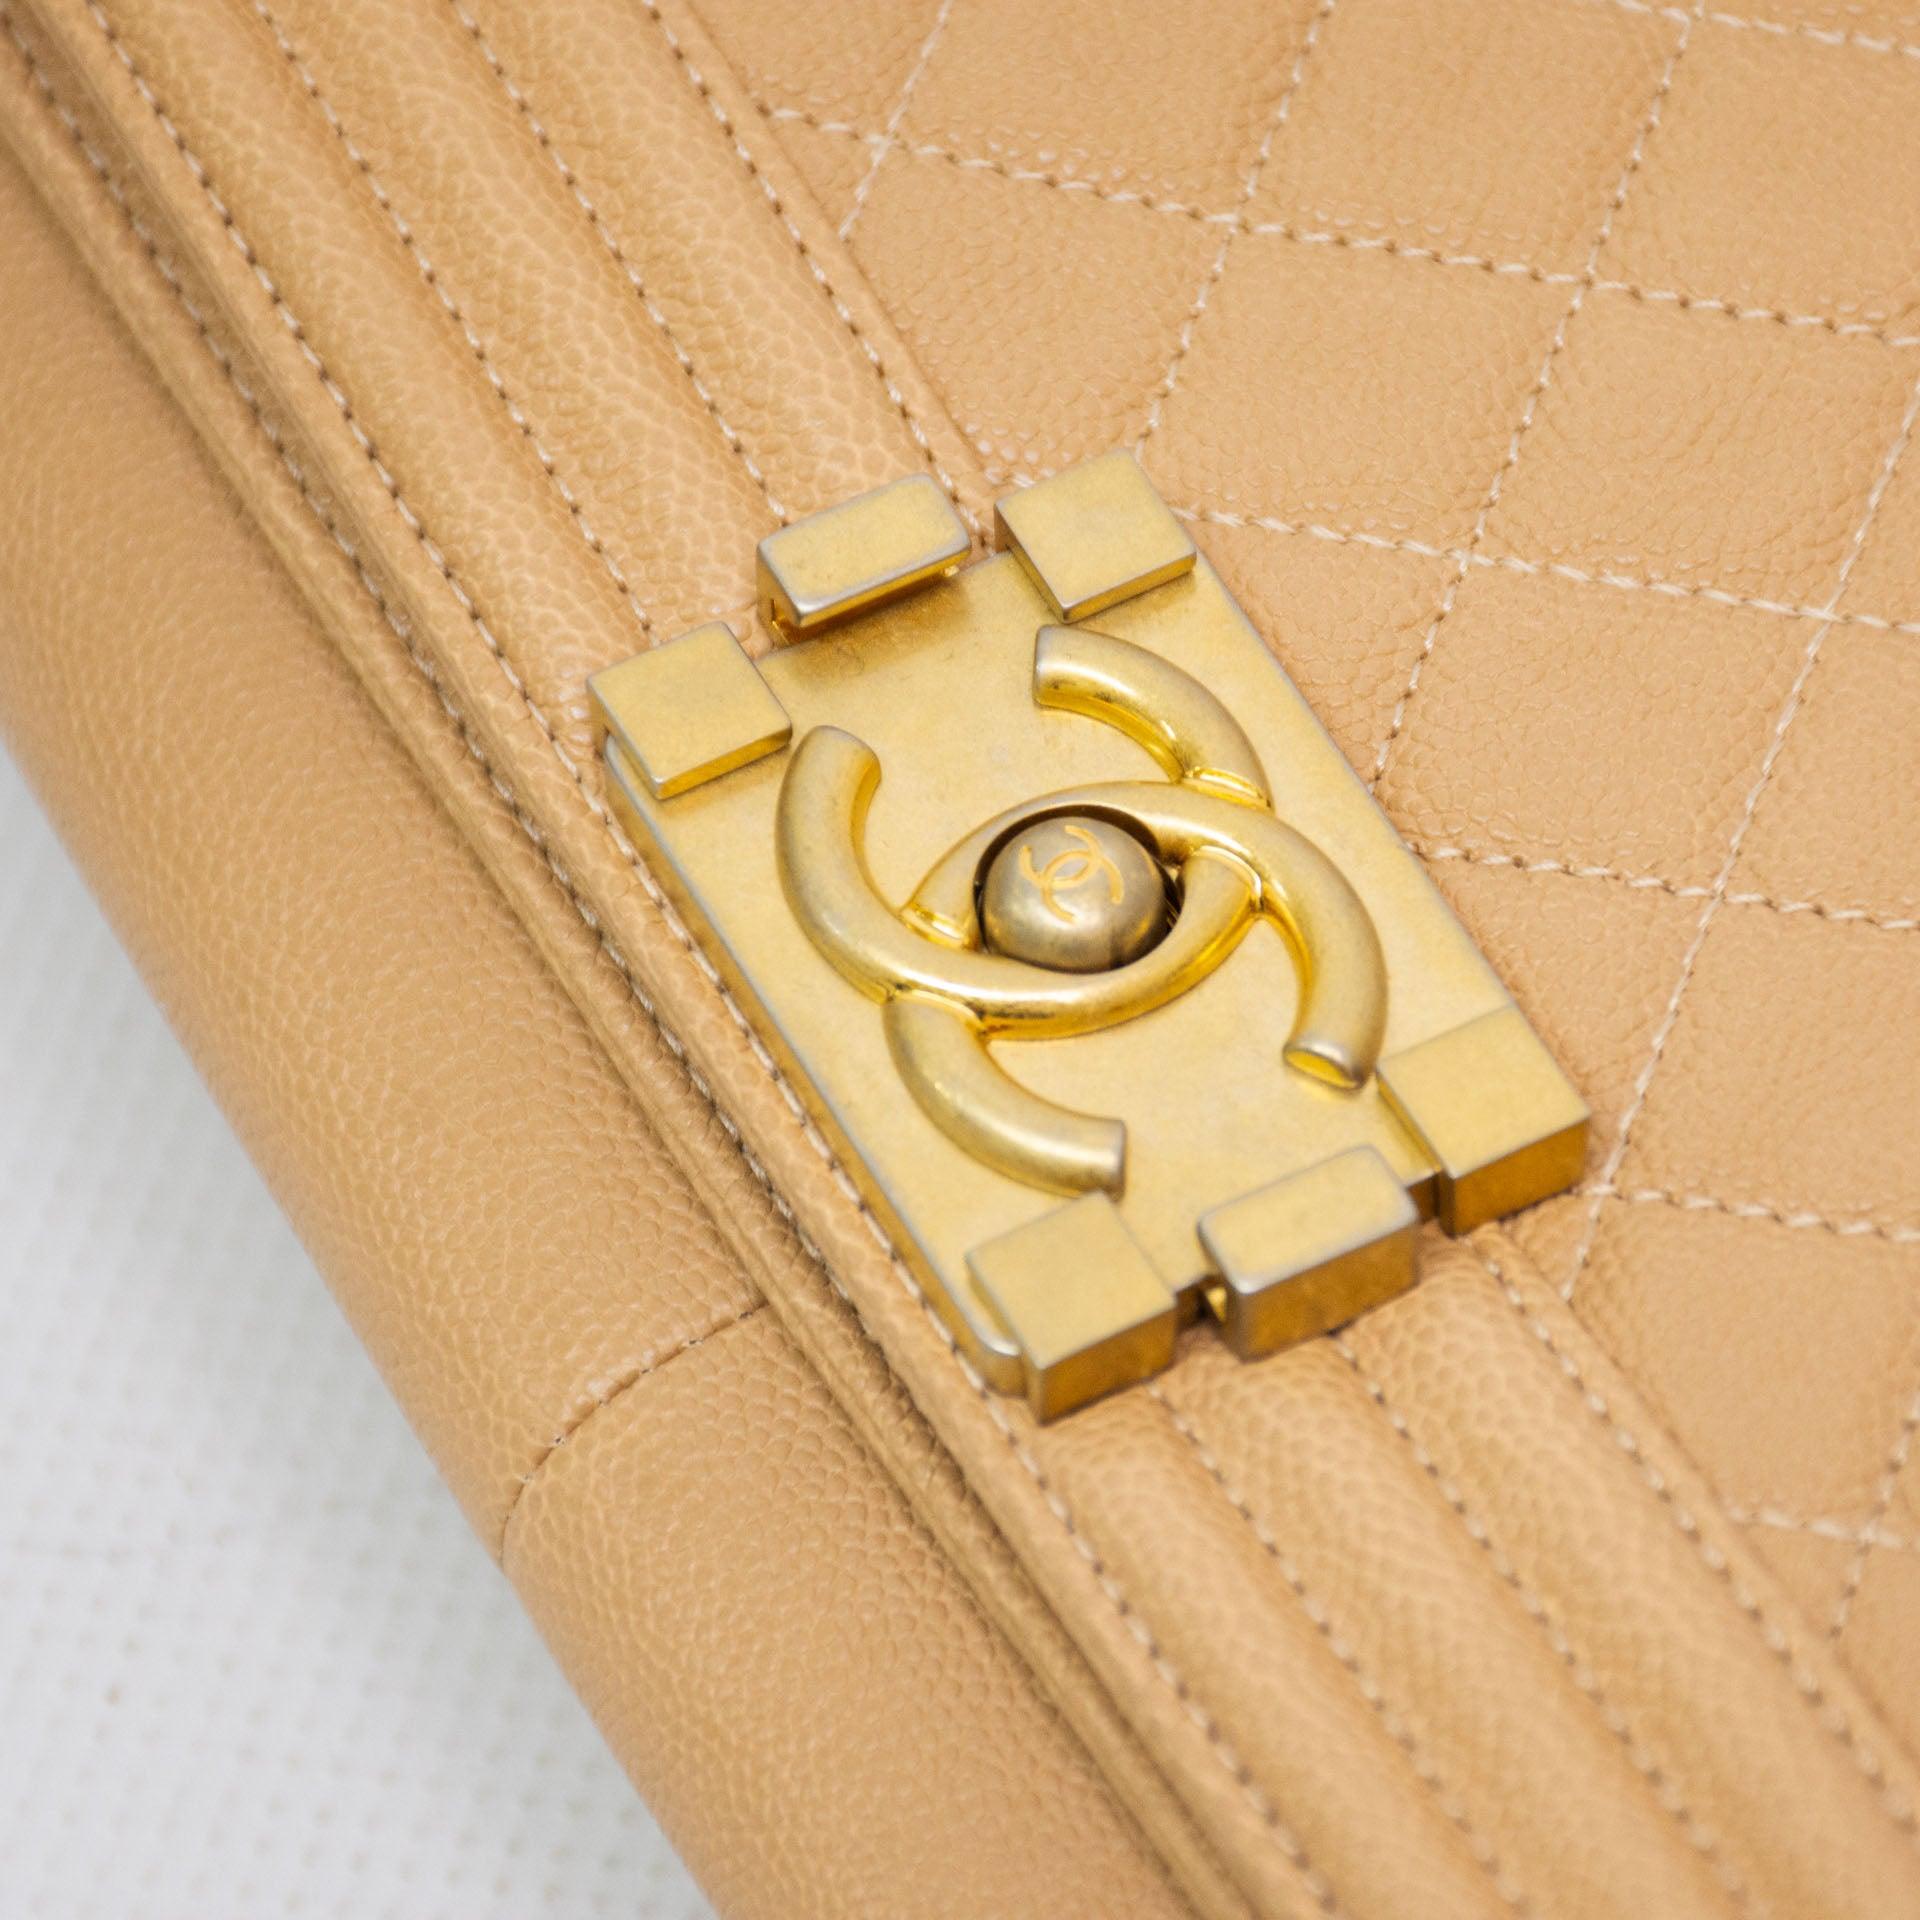 beige chanel flap bag outfit